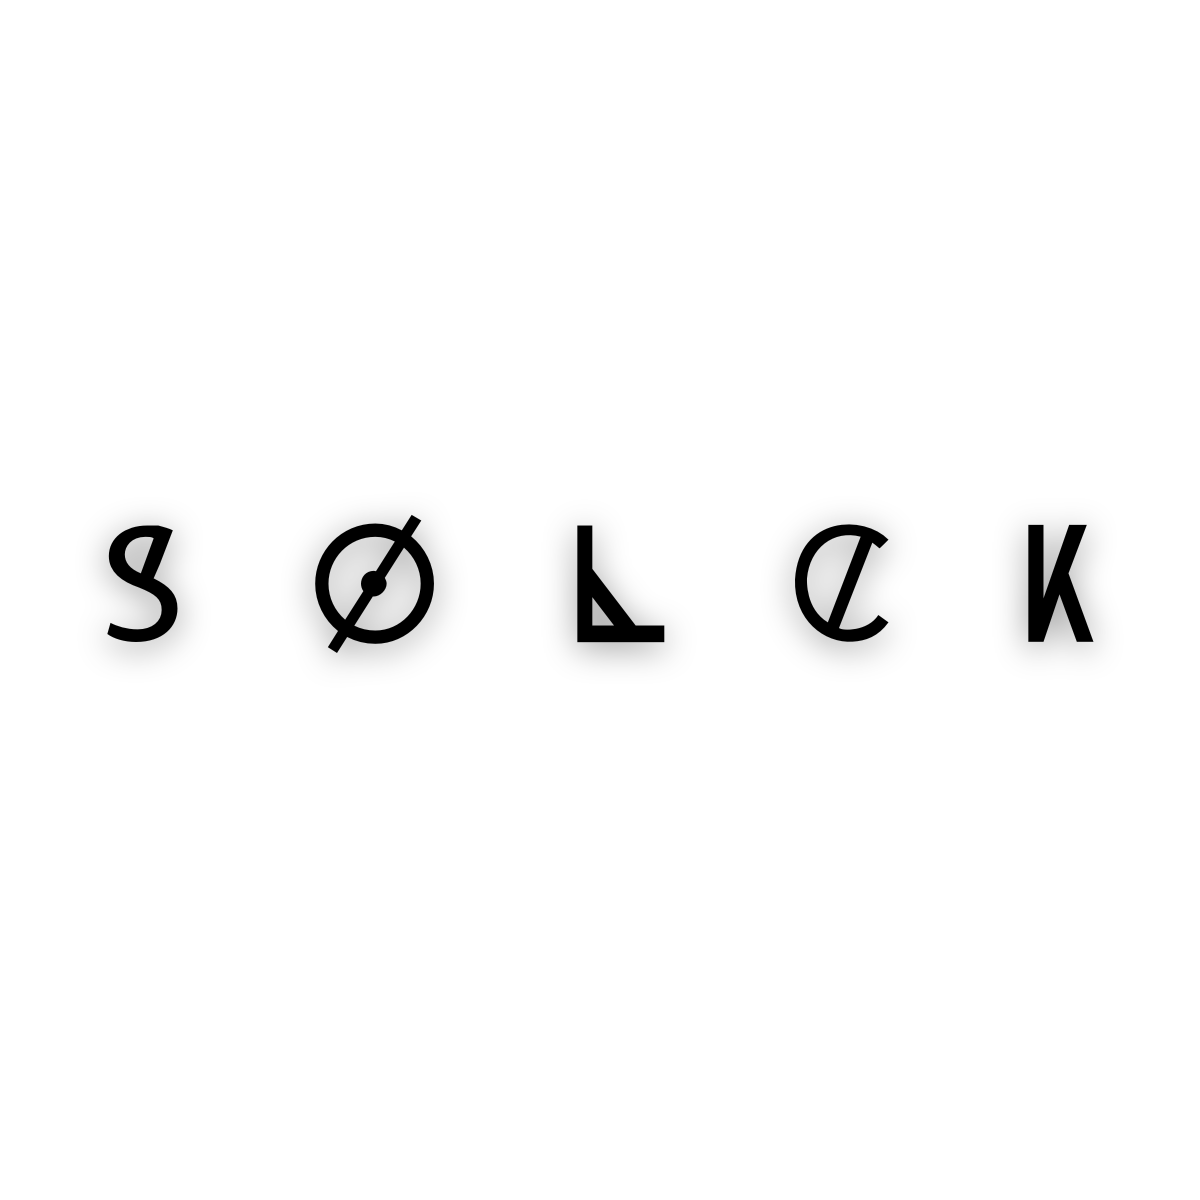 Solck Notion